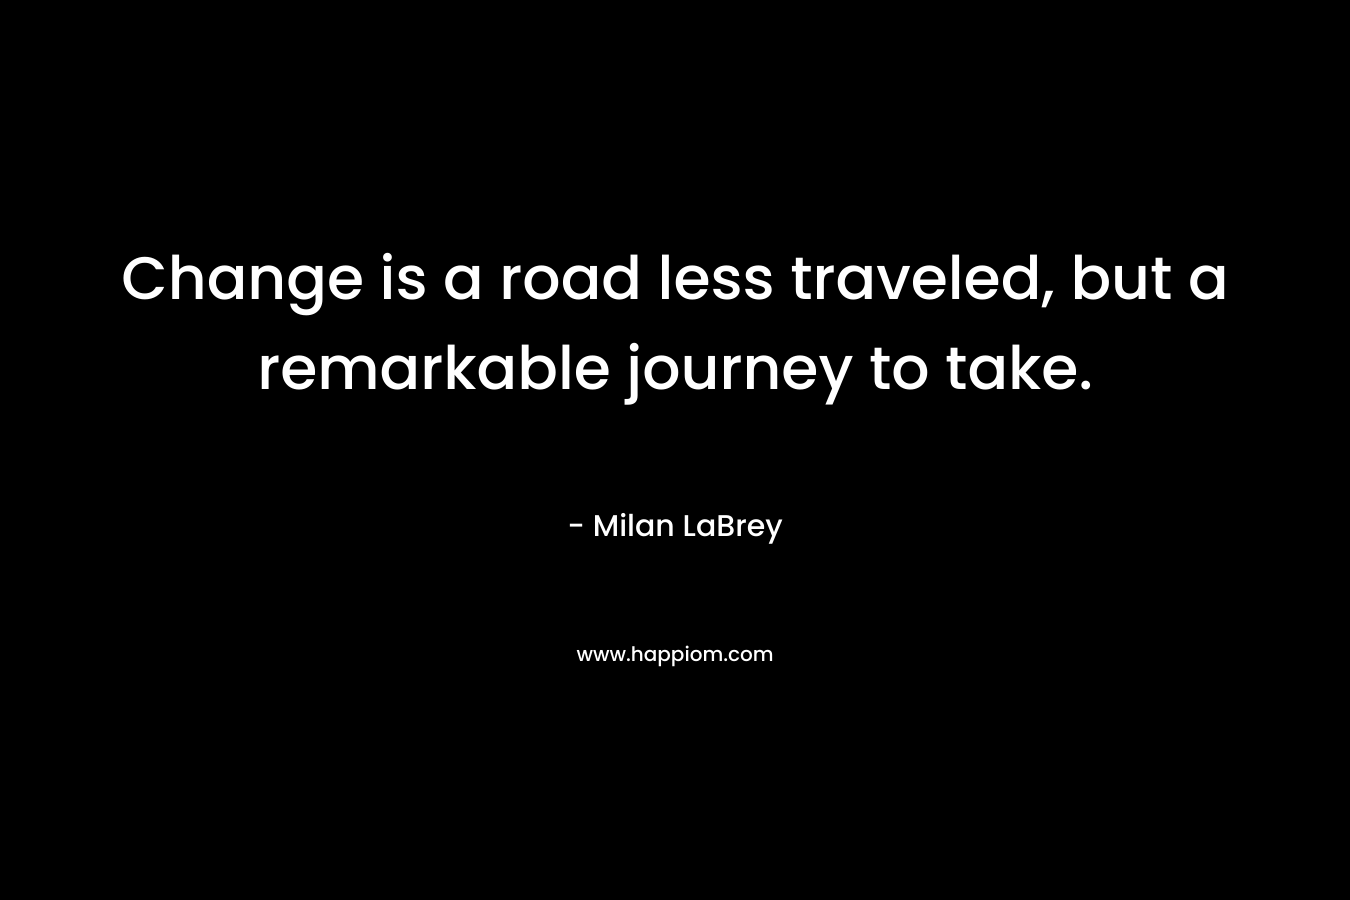 Change is a road less traveled, but a remarkable journey to take. – Milan LaBrey